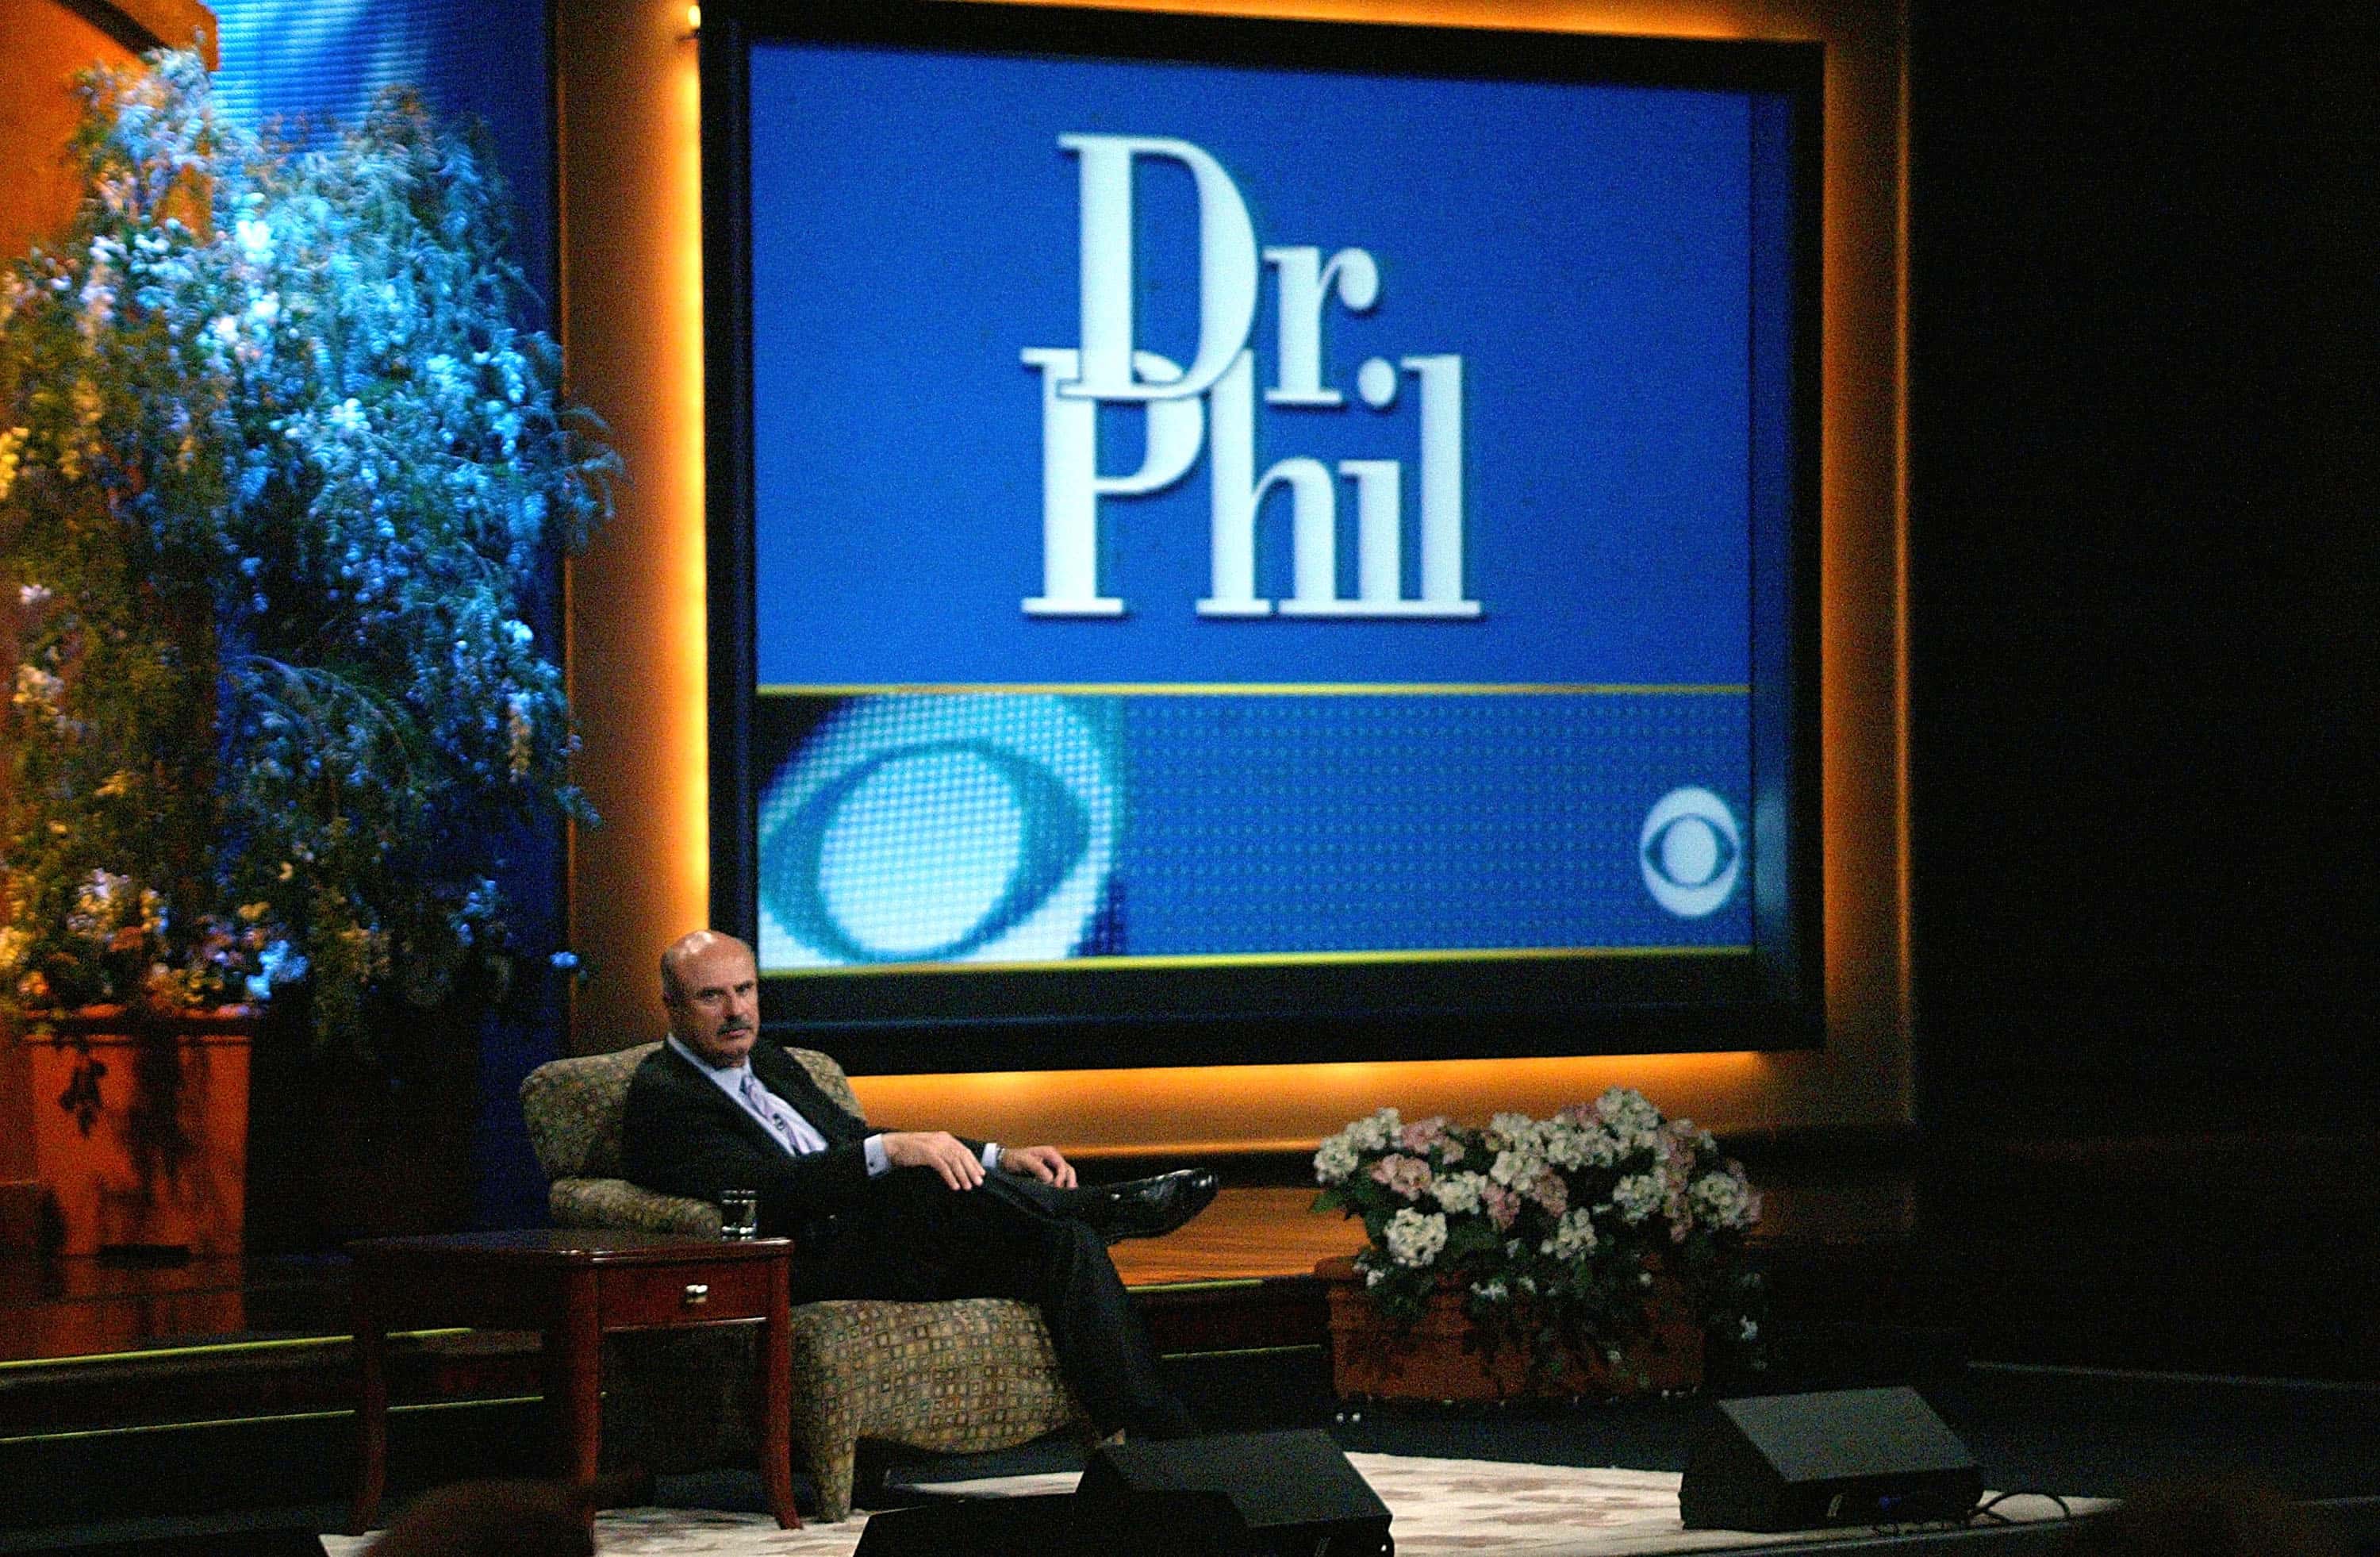 Dr. Phil facts 